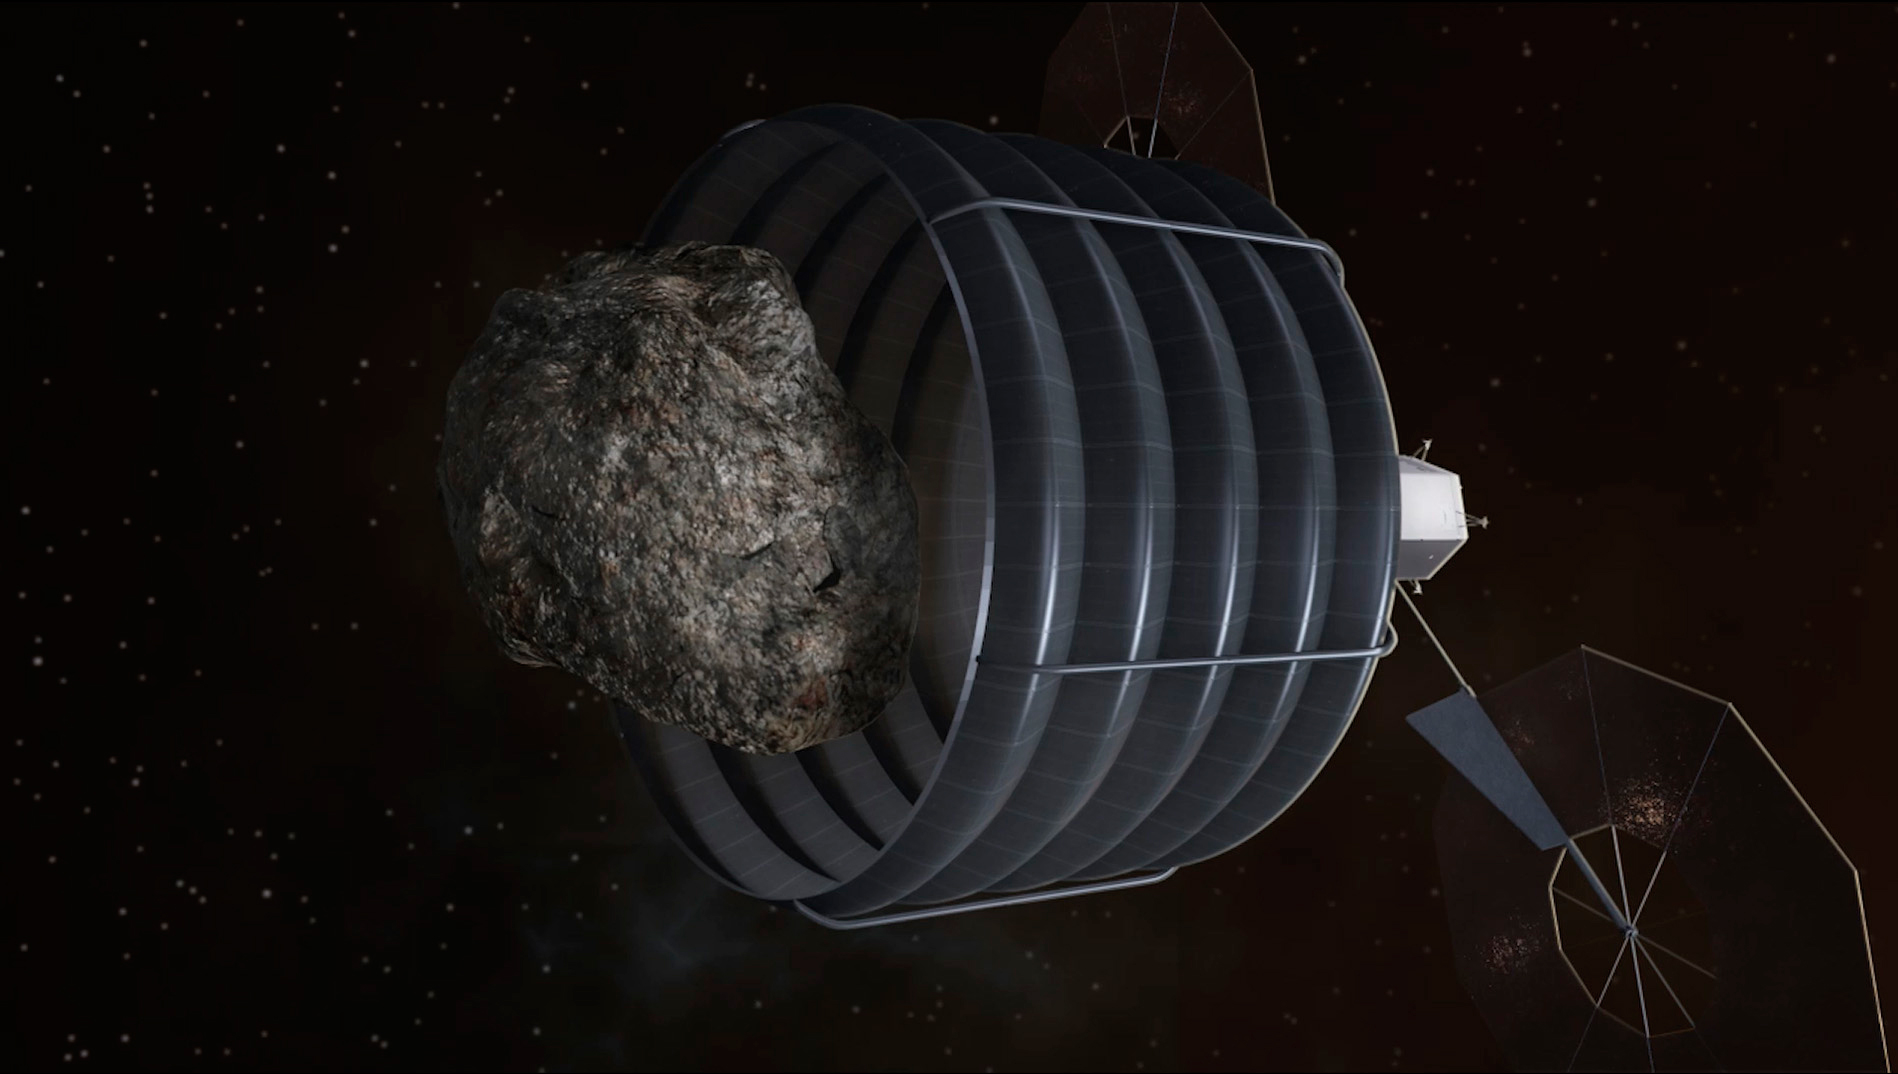 NASA asteroid capture. Image from: http://www.jpl.nasa.gov/asteroidwatch/newsfeatures.cfm?release=2013-131